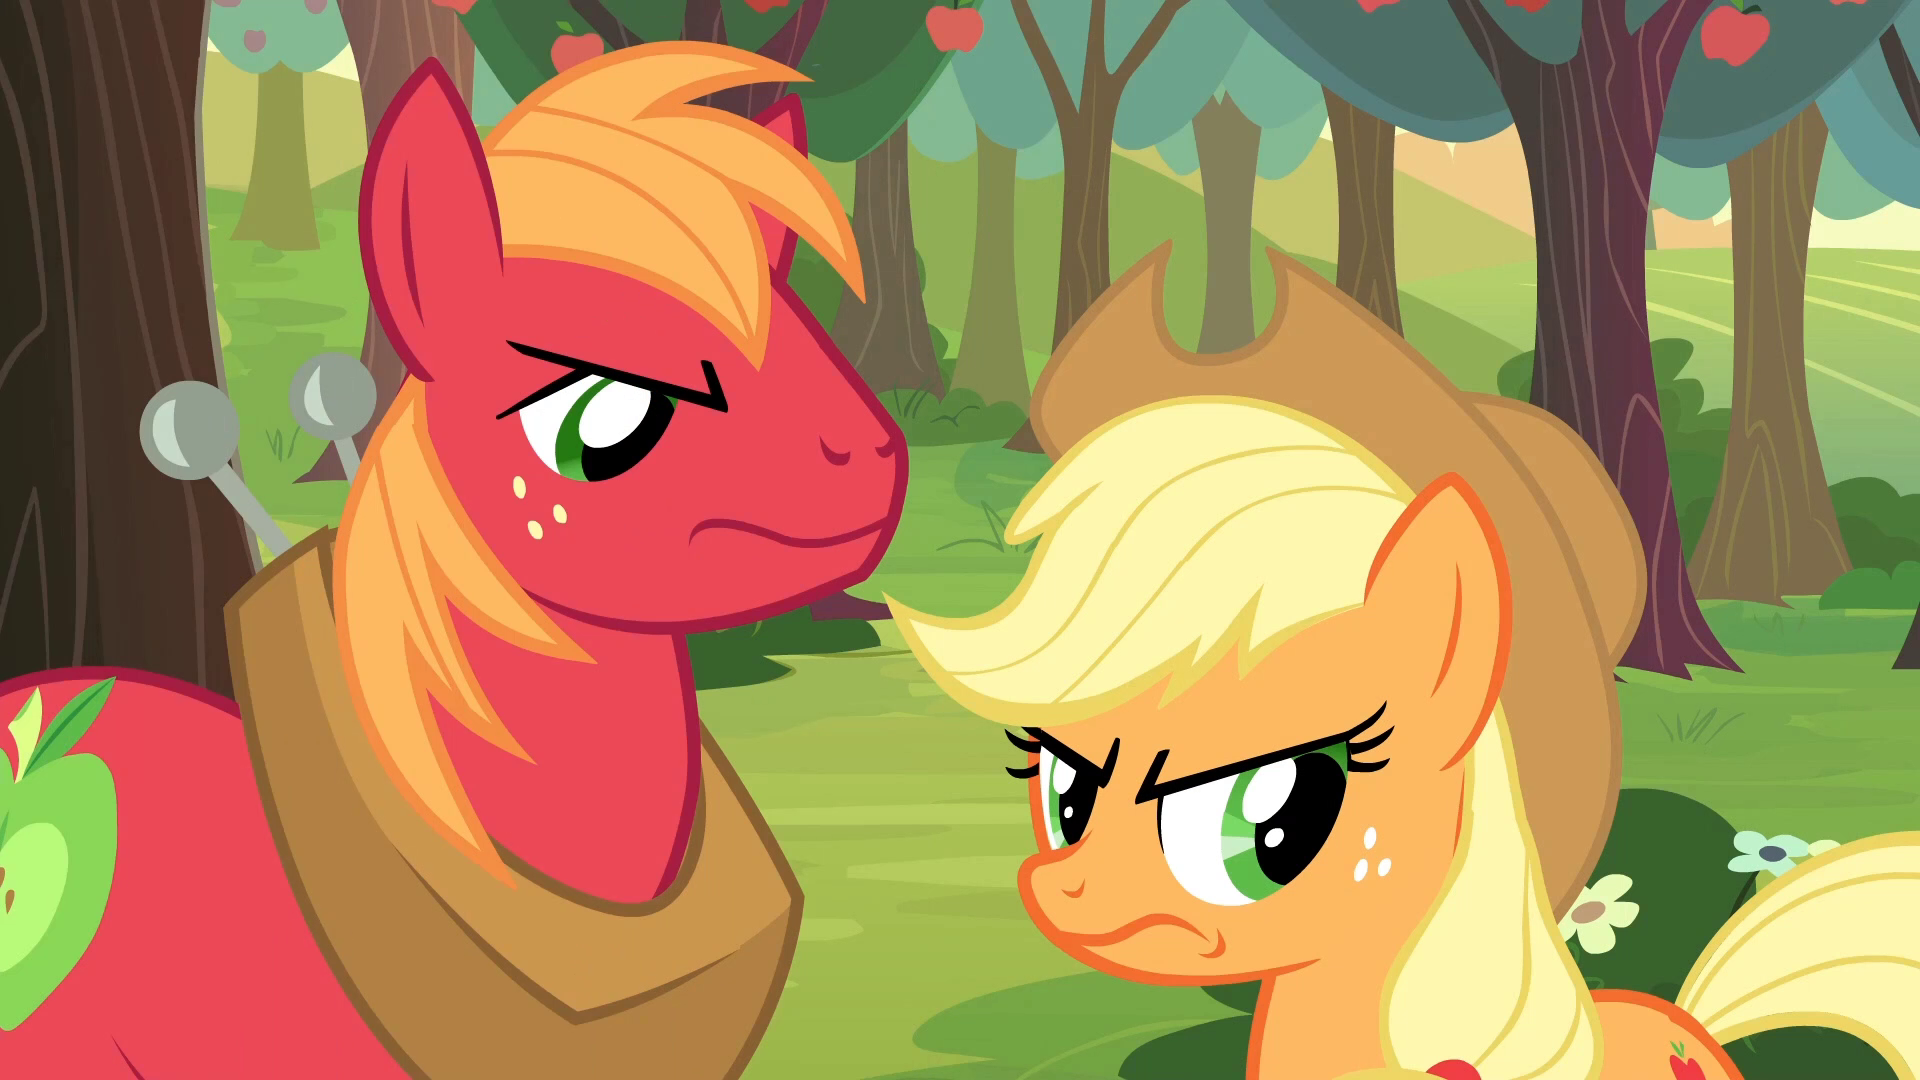 http://img1.wikia.nocookie.net/__cb20120404144235/mlp/images/c/c5/Applejack_and_Big_McIntosh_angry_S2E23.png